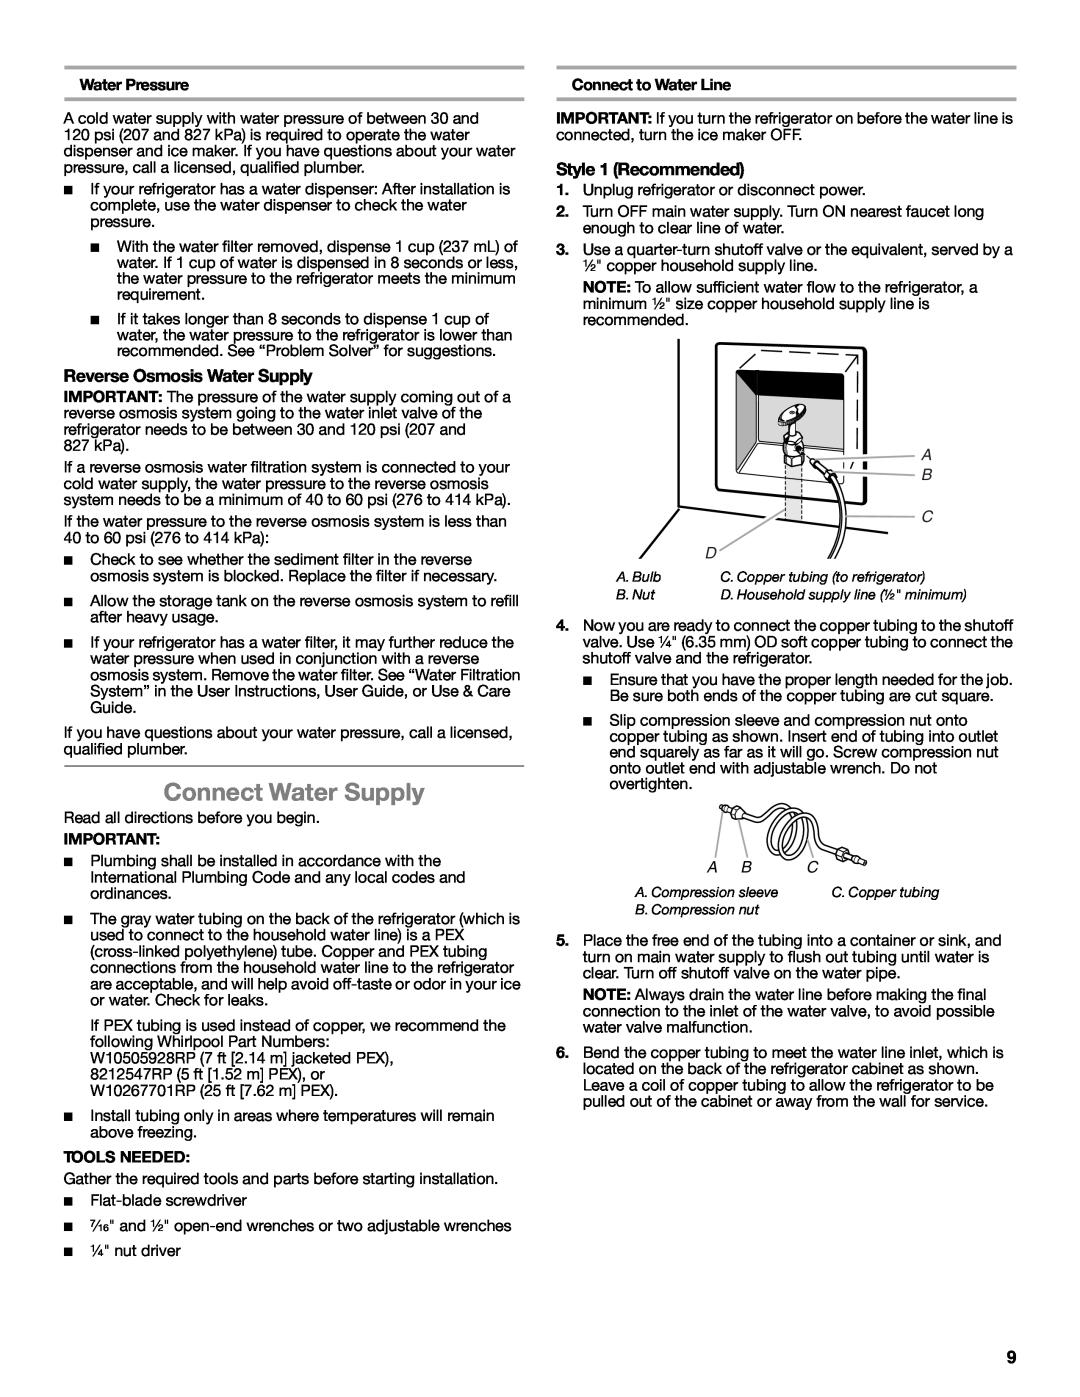 Whirlpool W10632883A installation instructions Connect Water Supply, Reverse Osmosis Water Supply, Style 1 Recommended 